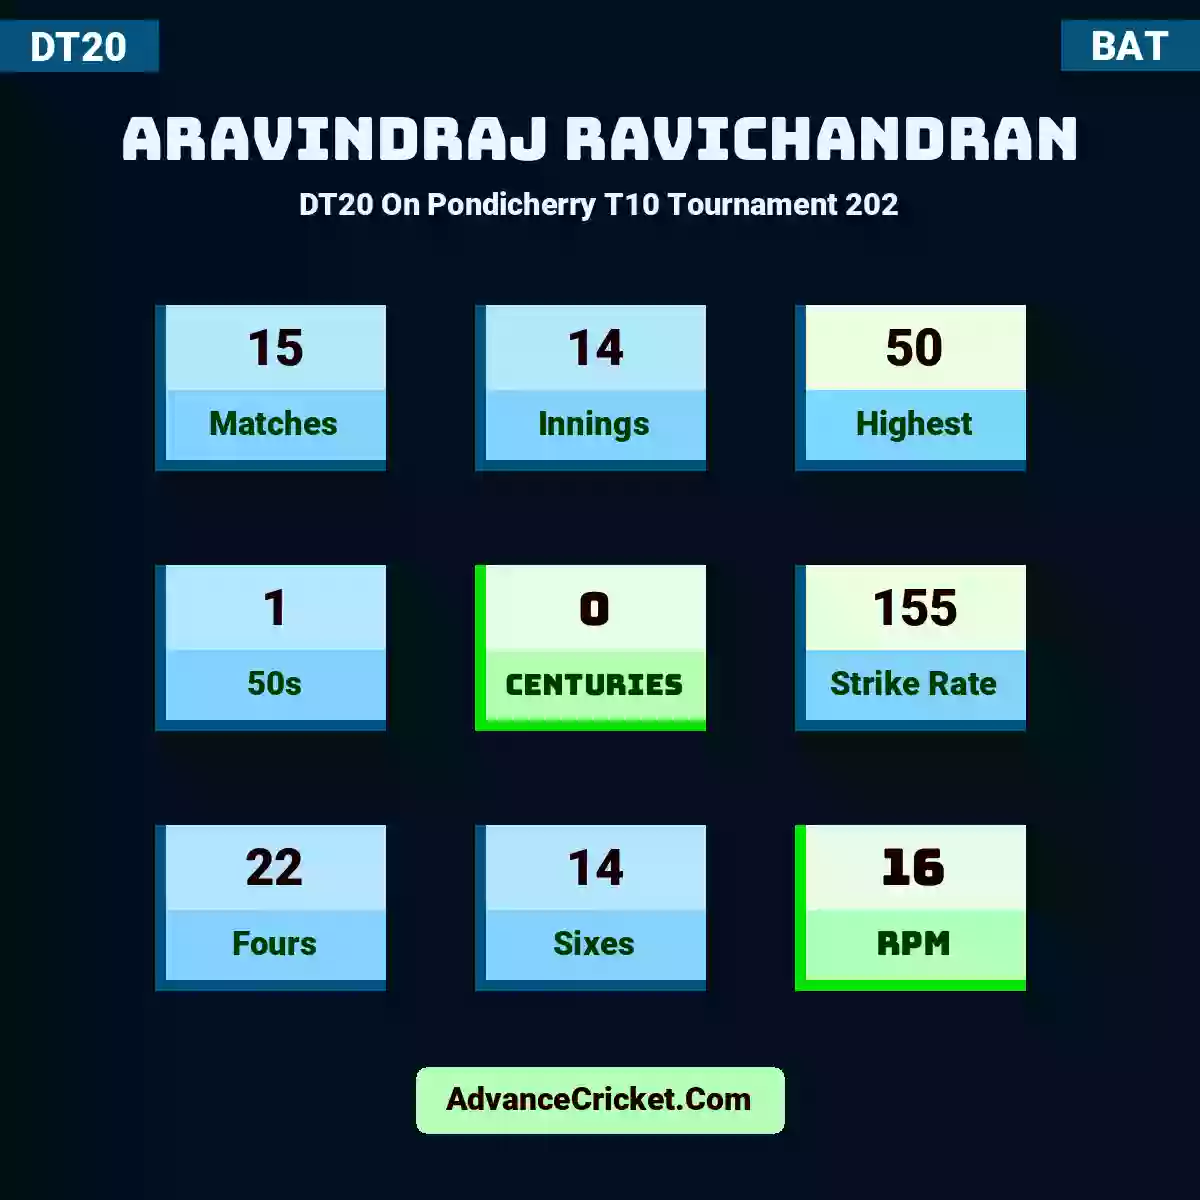 Aravindraj Ravichandran DT20  On Pondicherry T10 Tournament 202, Aravindraj Ravichandran played 15 matches, scored 50 runs as highest, 1 half-centuries, and 0 centuries, with a strike rate of 155. A.Ravichandran hit 22 fours and 14 sixes, with an RPM of 16.